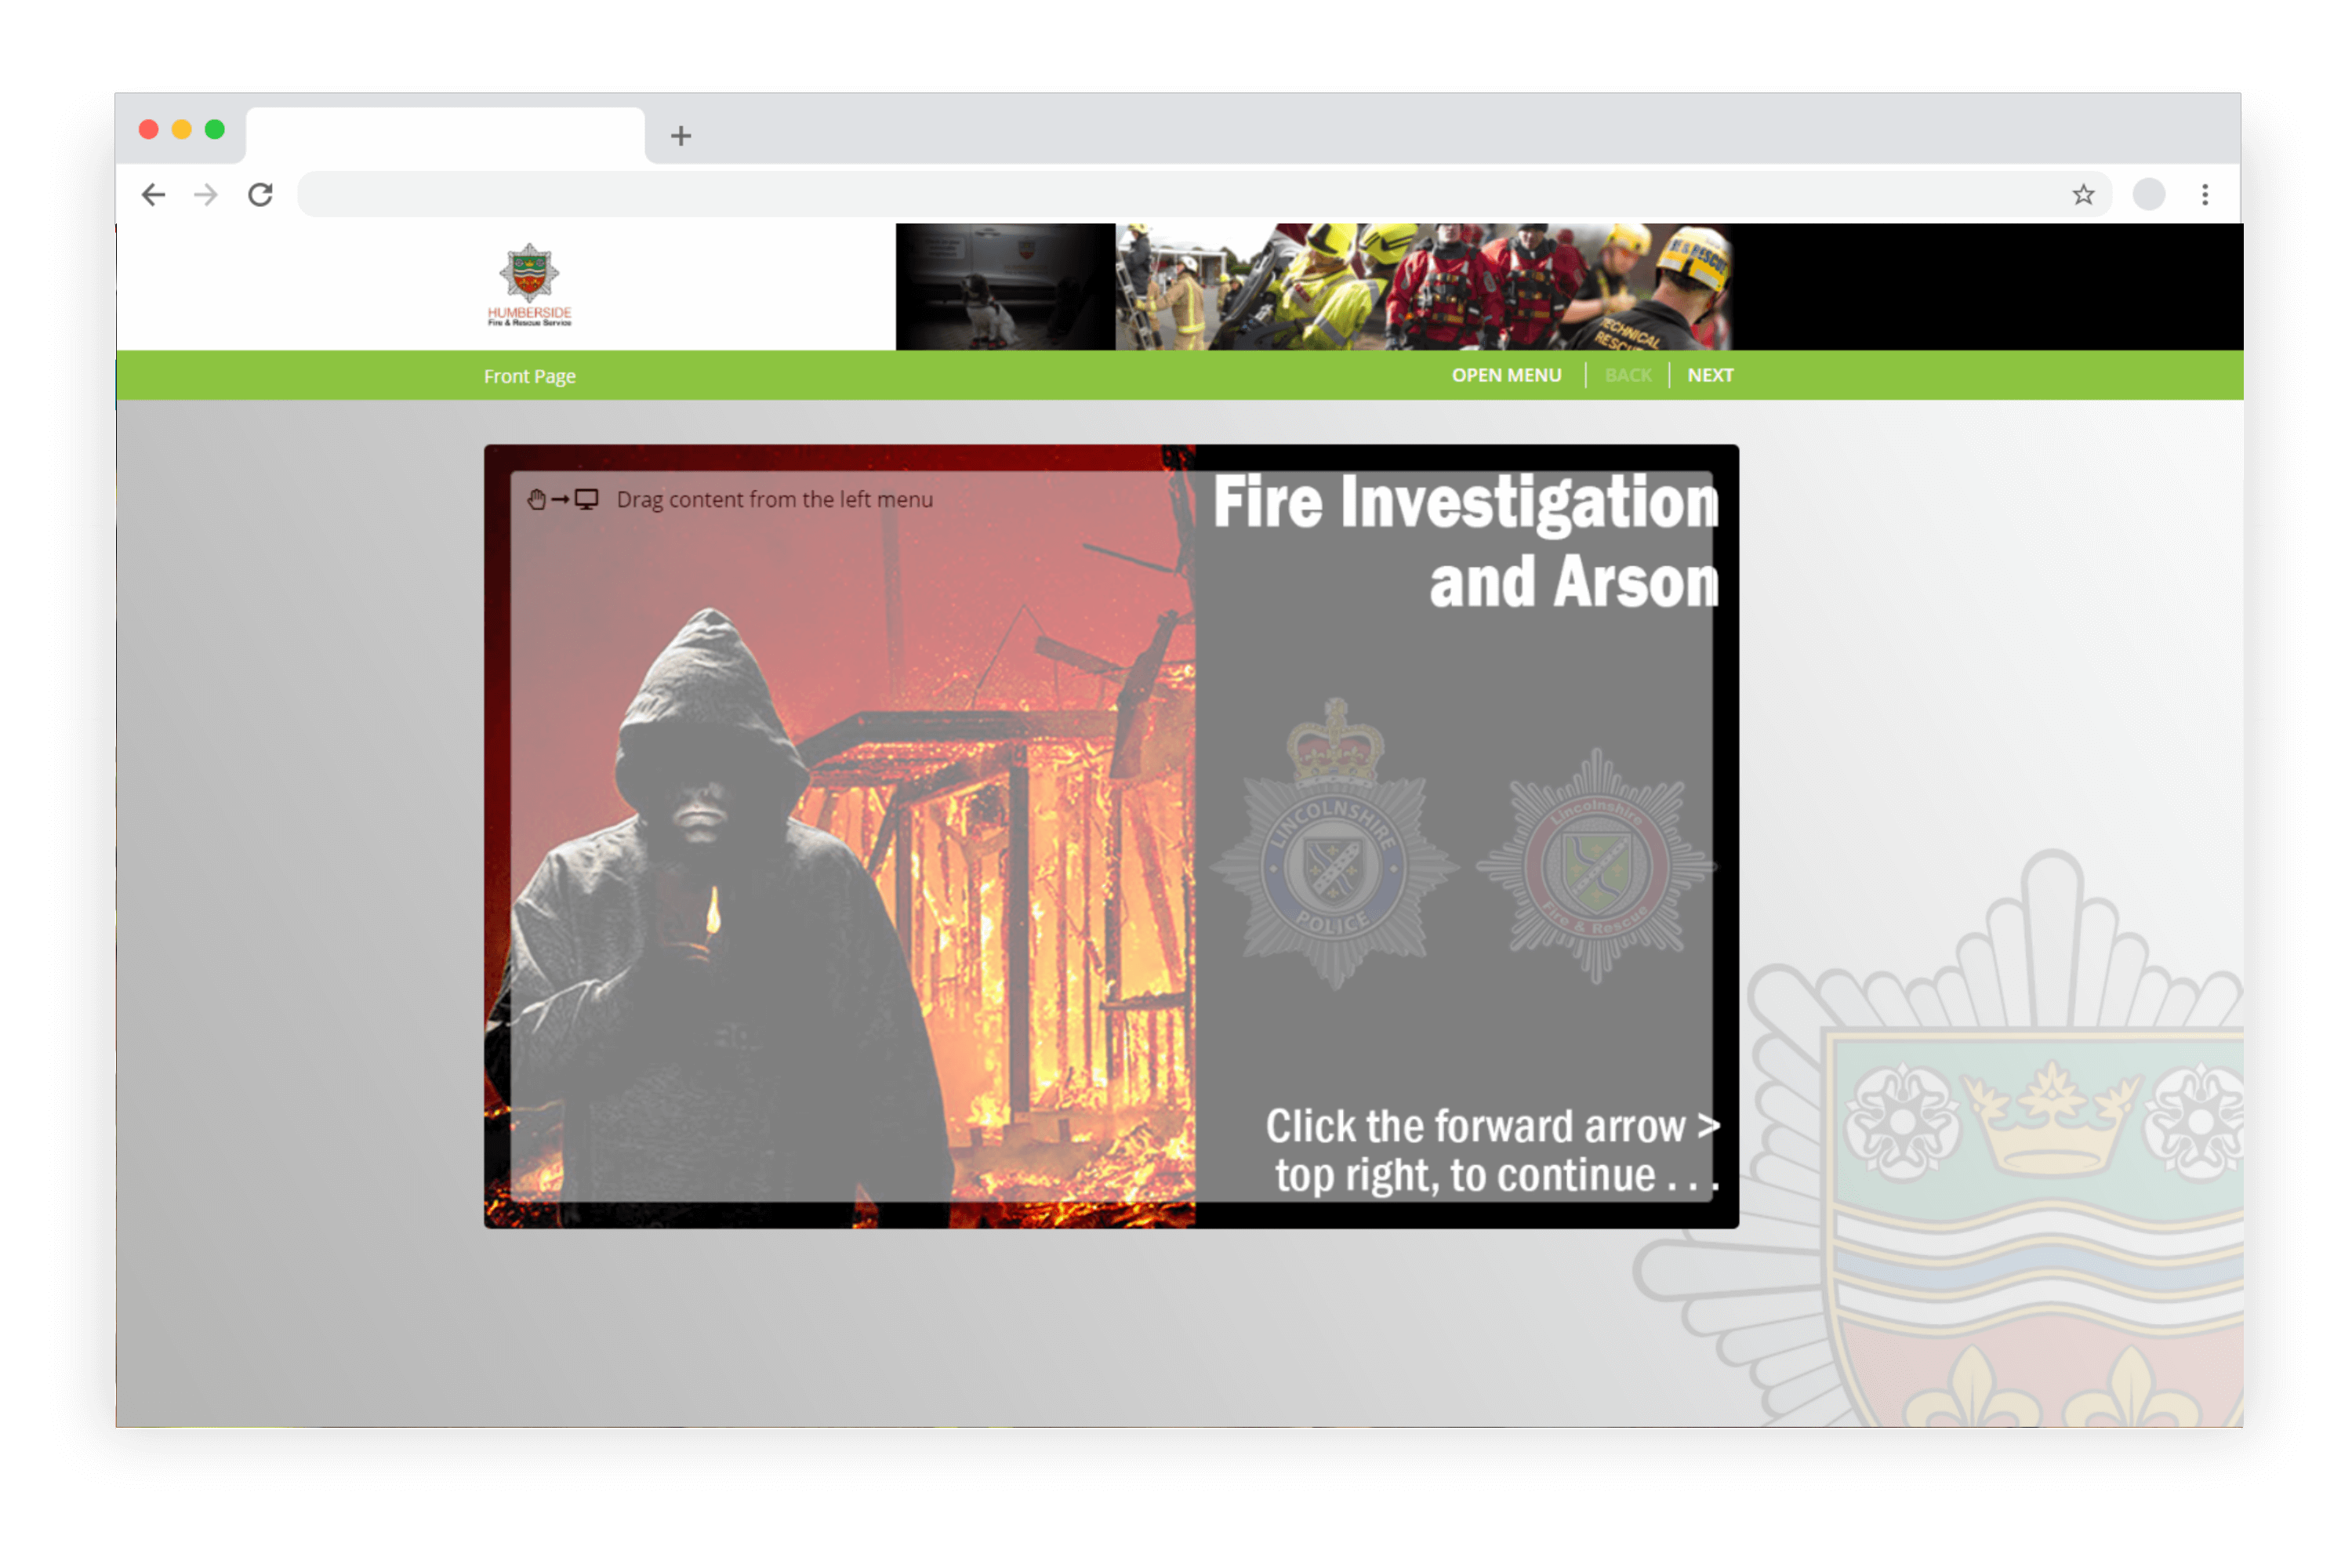 Example e-learning showing a fire investigation and arson course developed in LAB Advanced